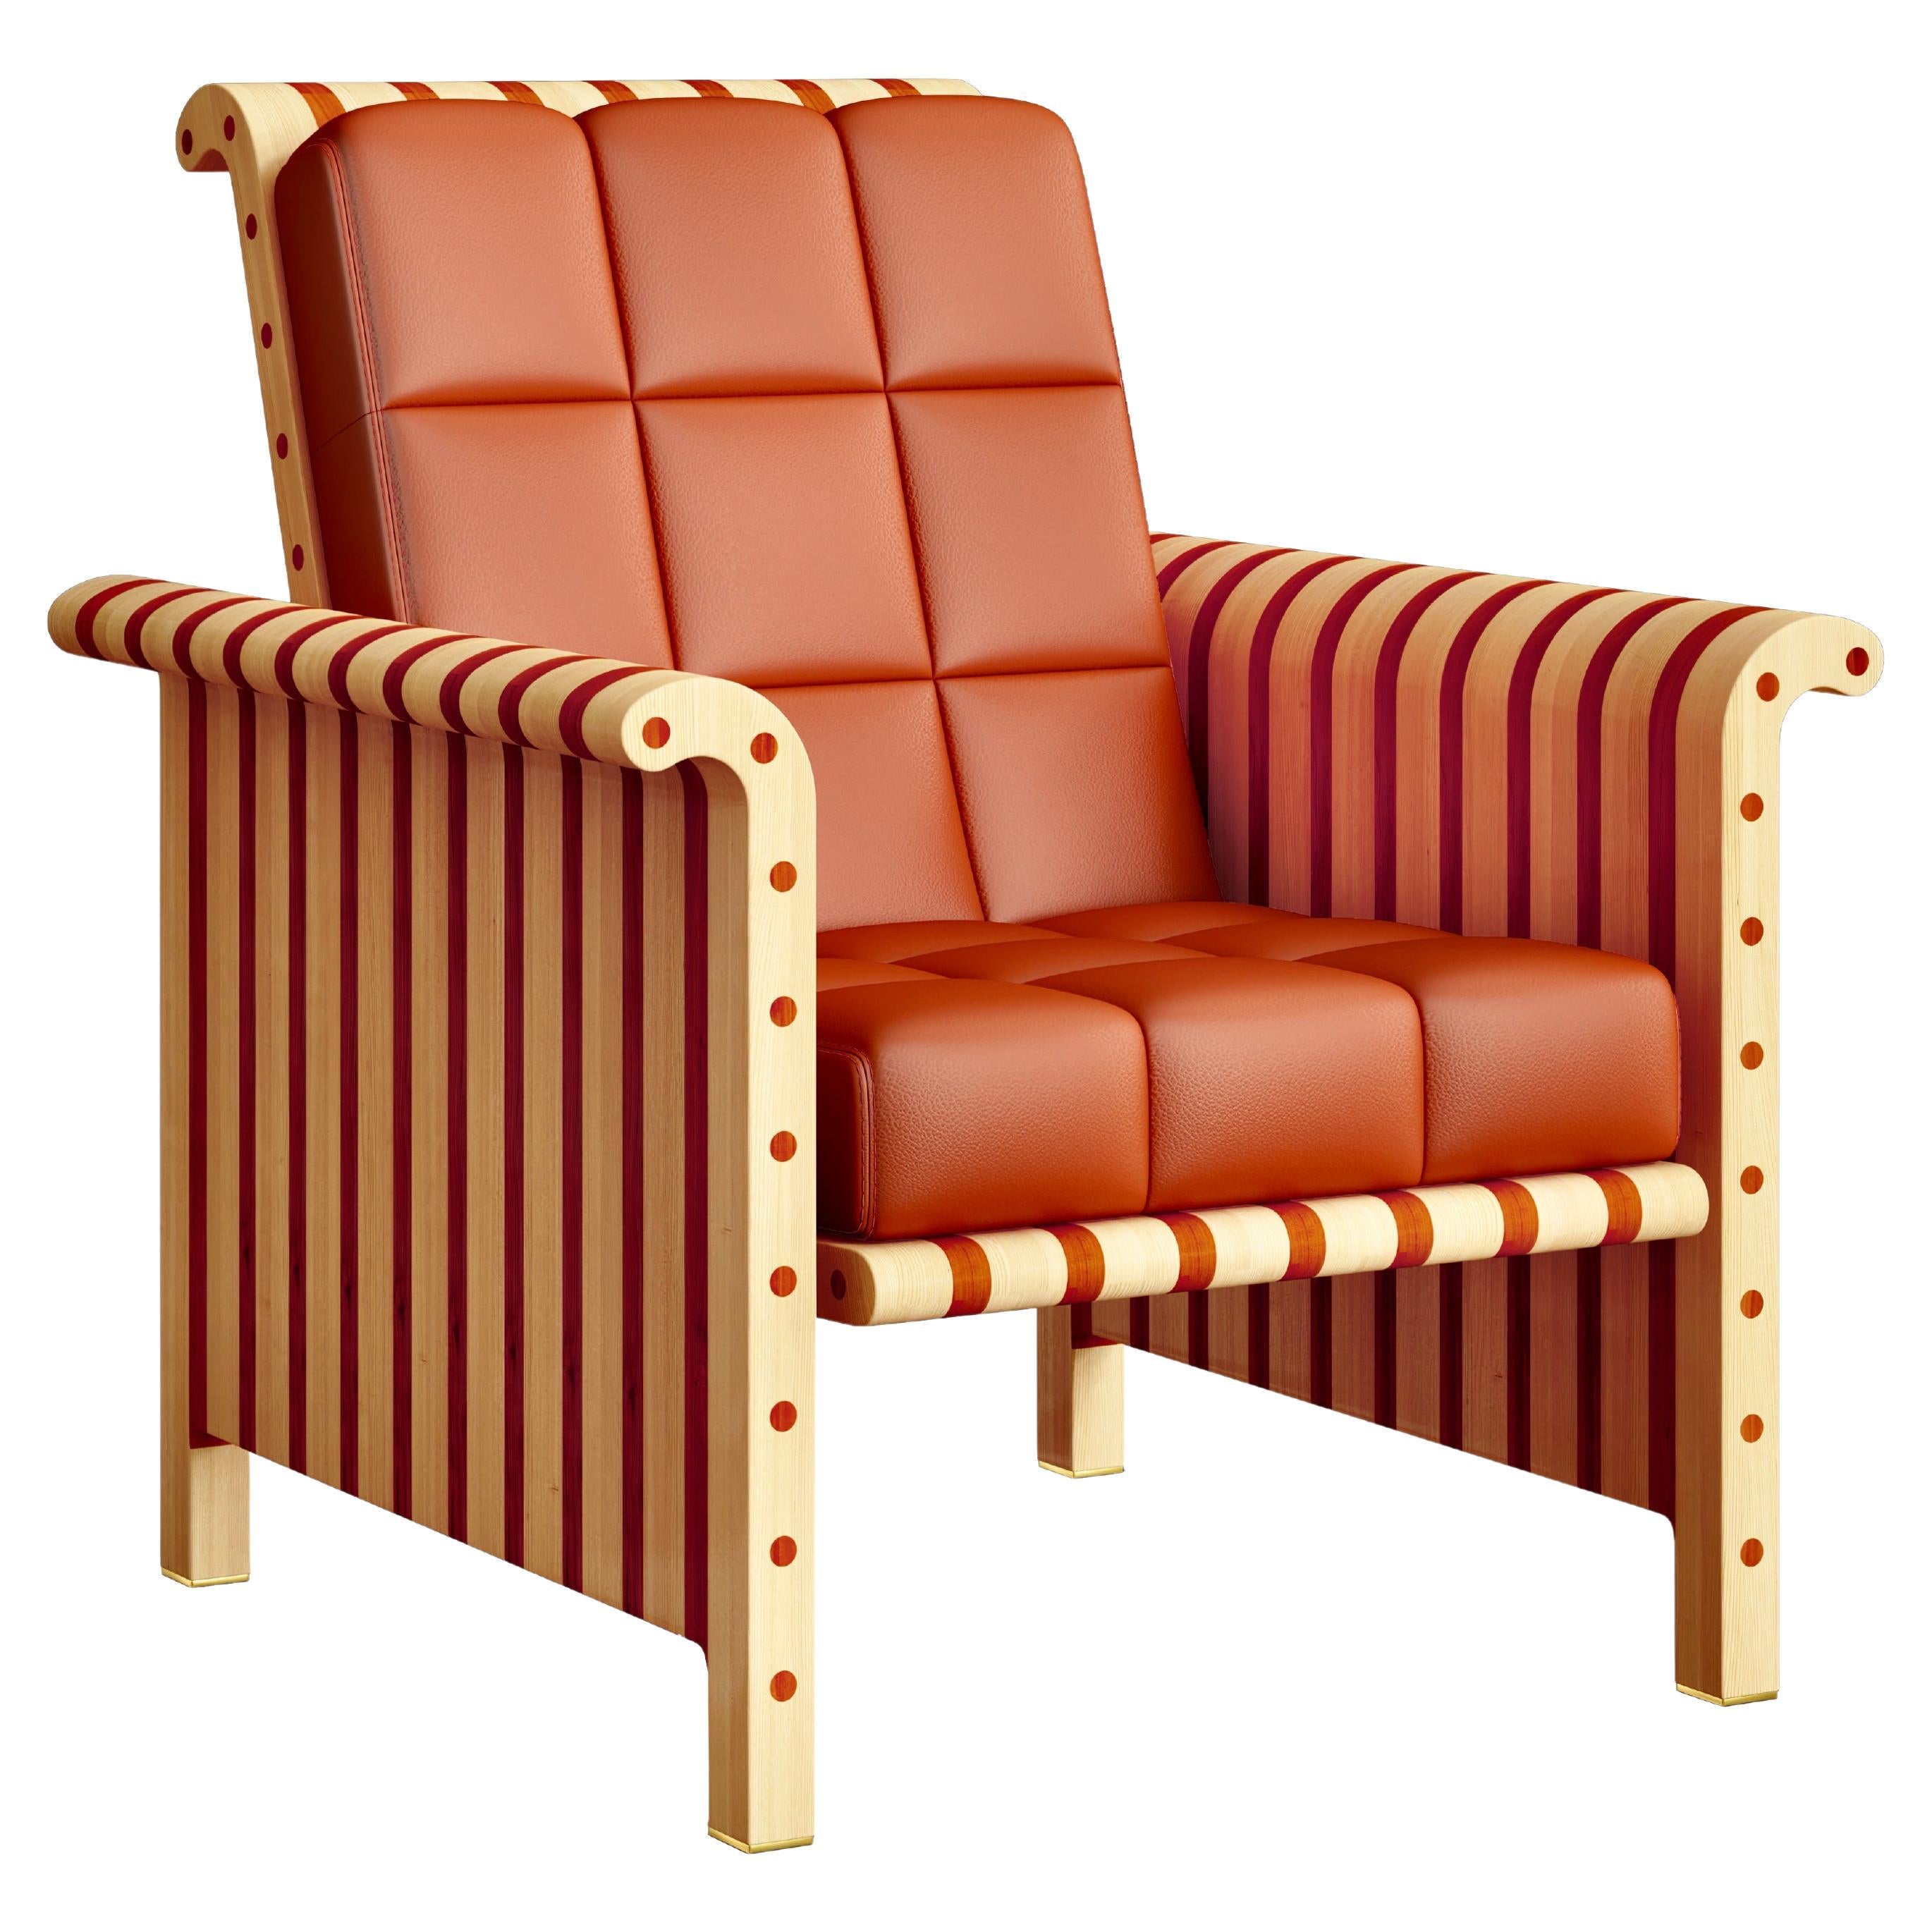 Maple & Padauk Solid Wood Lounge Chair With Leather Upholstery For Sale